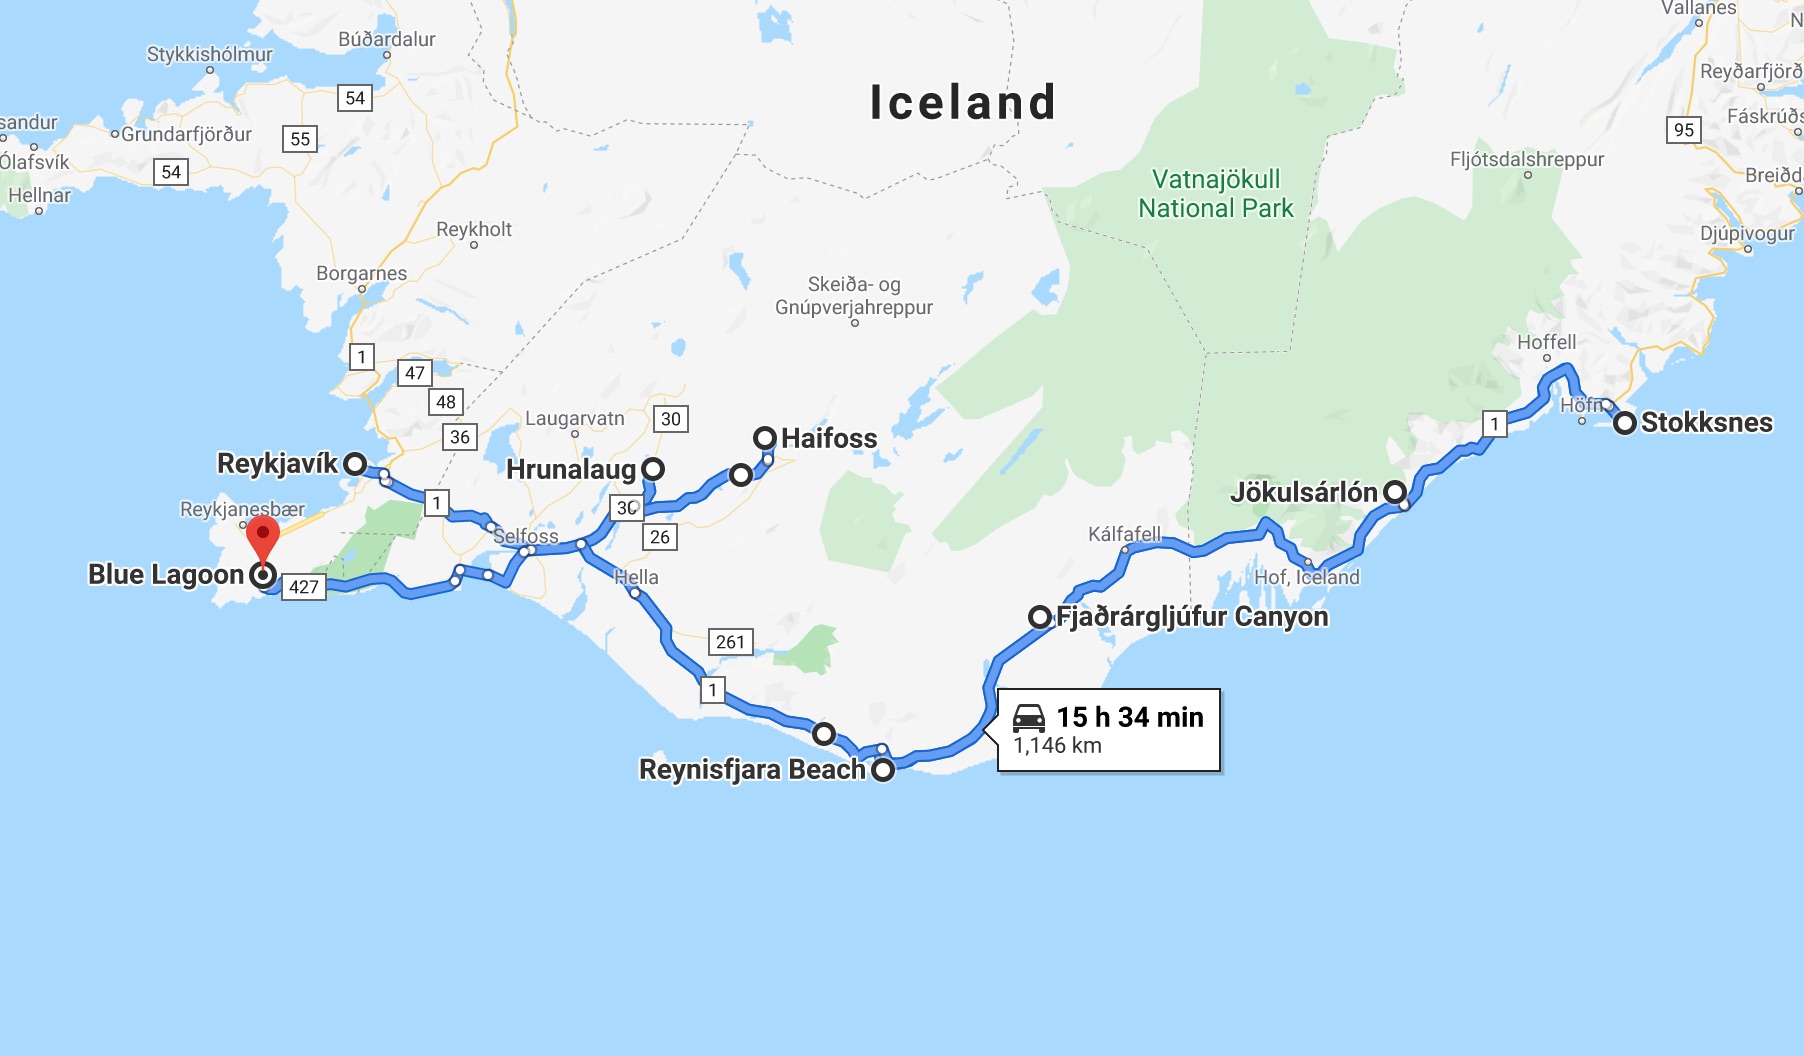 screen shot of 4 days in iceland itinerary map from google maps showing stops along the way